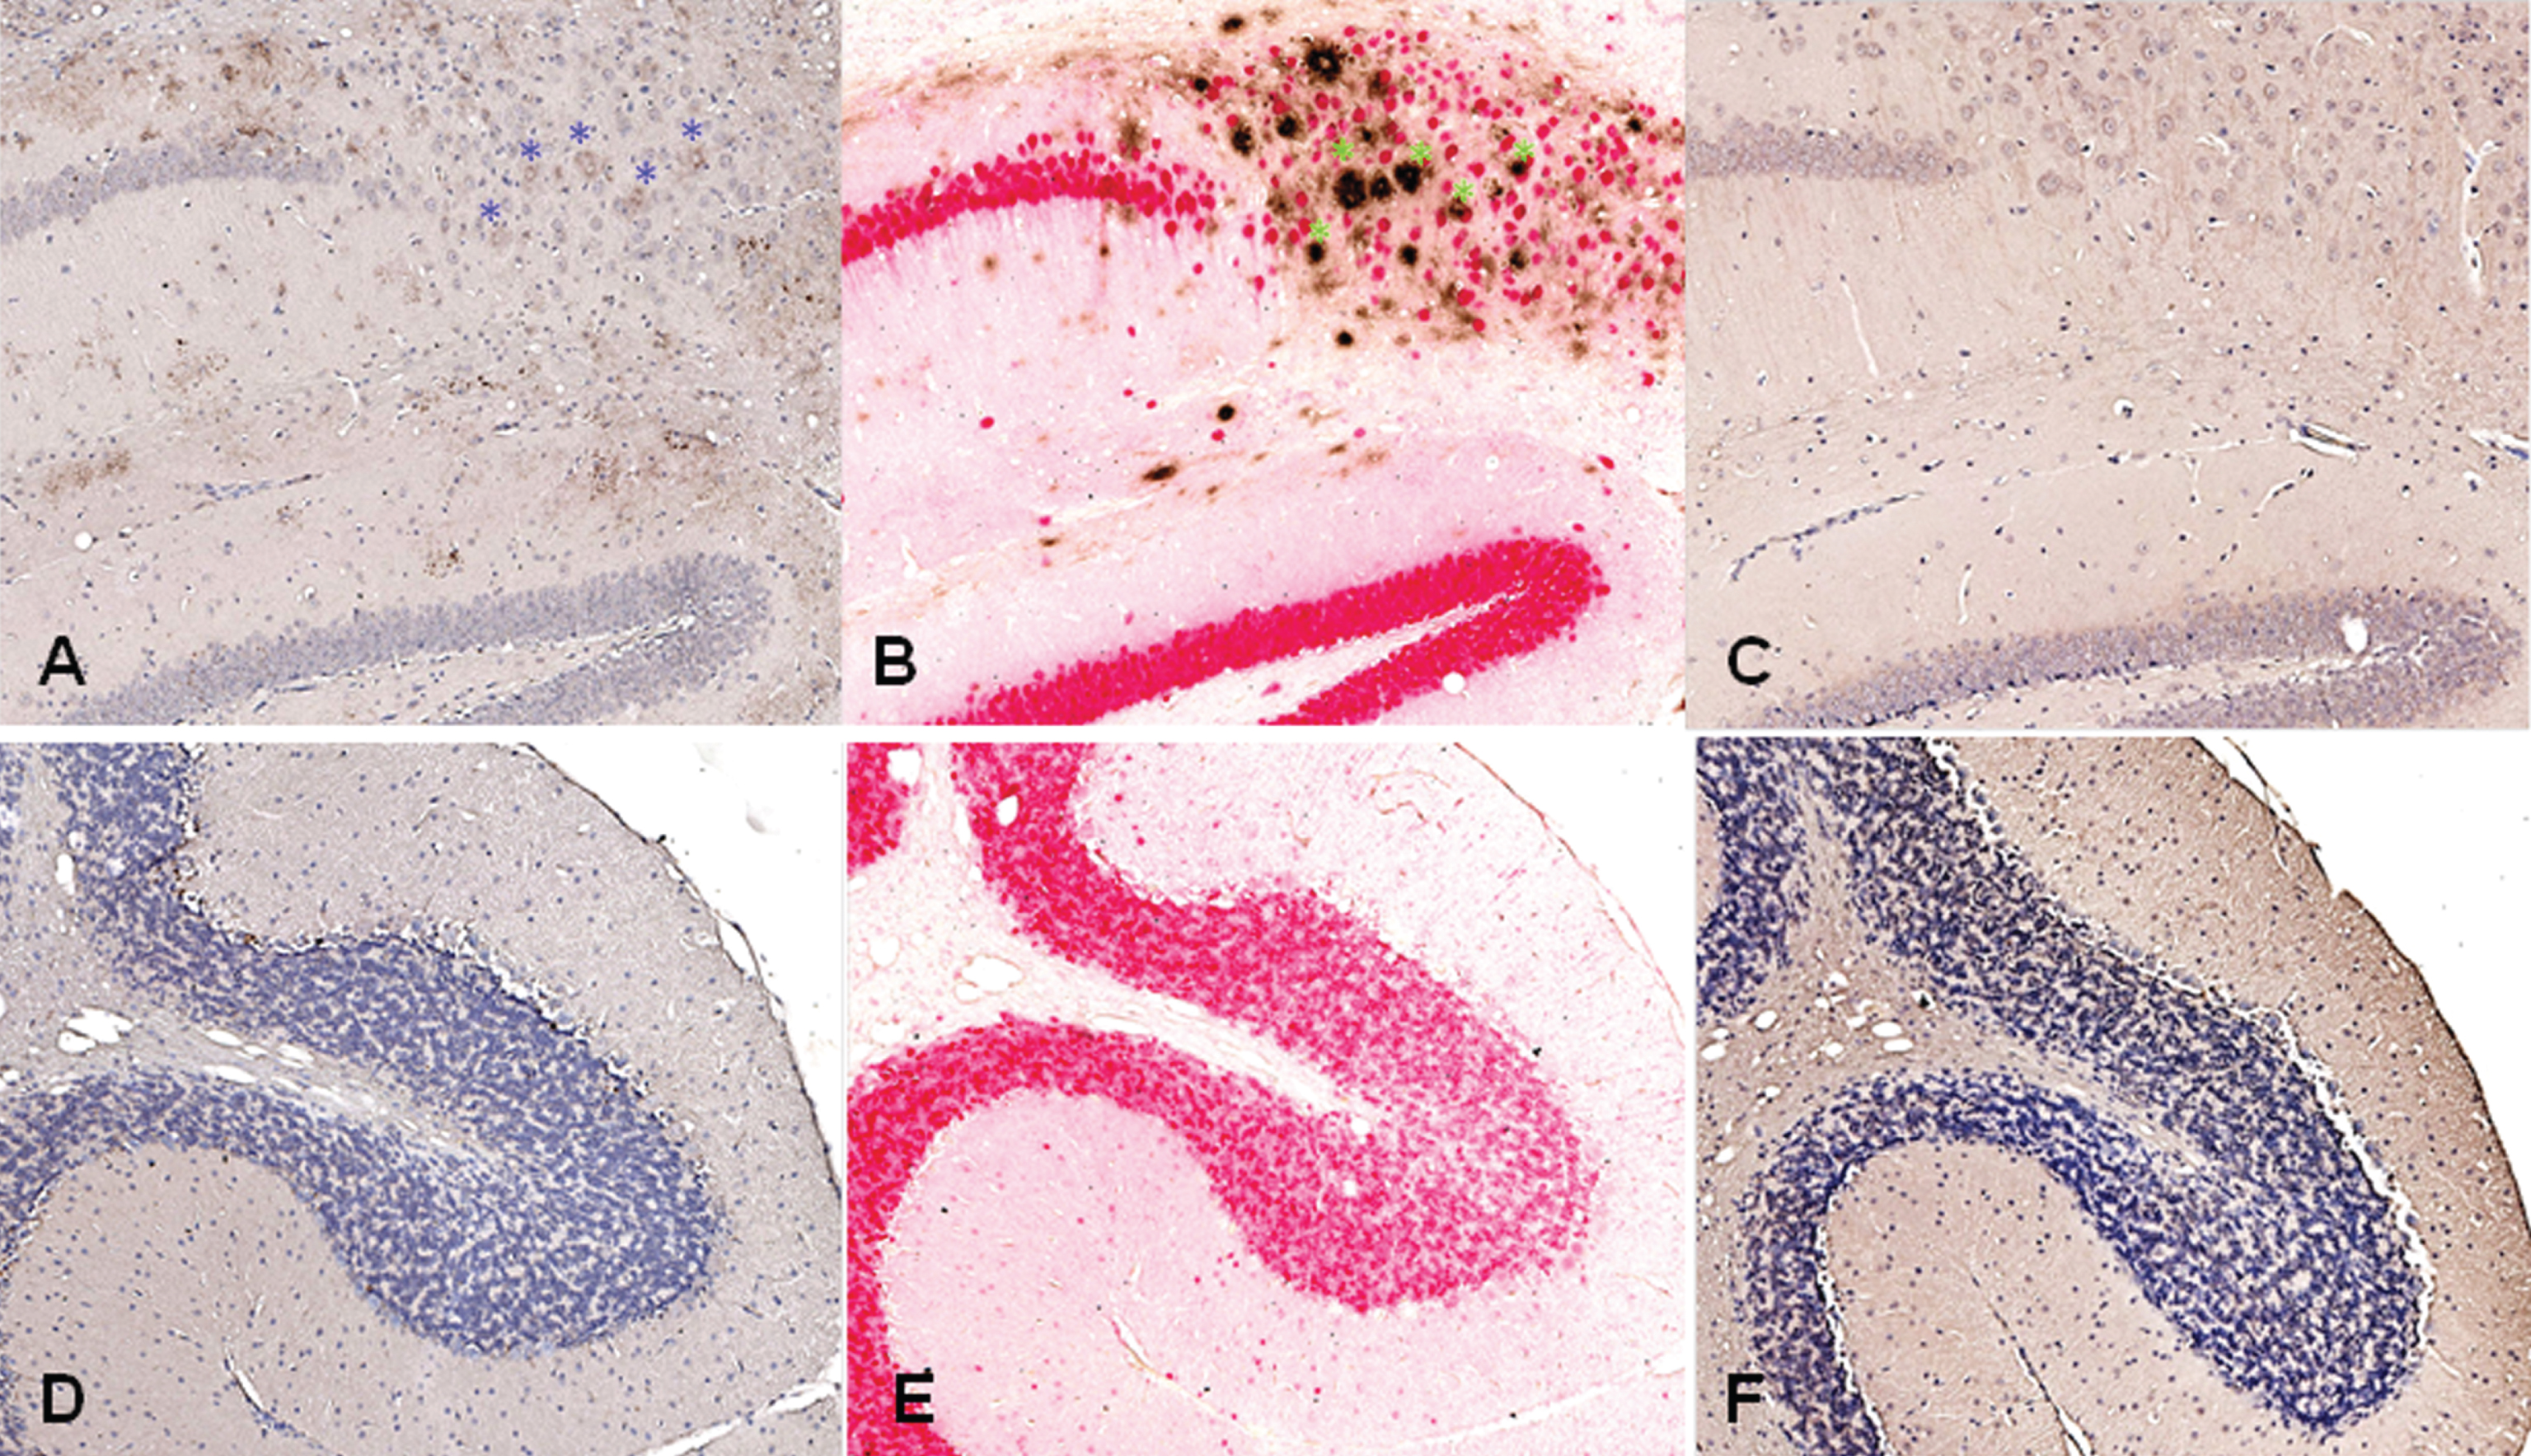 Antibodies from DNA Aβ42 immunized rabbits stain amyloid plaques in brain of 3xTg-AD mice (24 months old mouse). A) Aβ staining in hippocampus area with plasma from rabbit 828D (brown), B) control staining in parallel section with commercial anti-Aβ42 antibody (McSA1, brown) and NeuN (red), C) control staining of brain section from this 3xTg-AD mouse with control serum from a non-immunized rabbit, D–F) show no staining with rabbit antiserum and commercial antibody in plaque free cerebellum. In all sections, a 10x magnification is shown (Hamamatzu Nanozoomer). Asterisks indicate plaques stained with rabbit plasma (in A, blue in the color version online and black in the print version) and commercial control antibody (in B, green in the color version online and black in the print version).